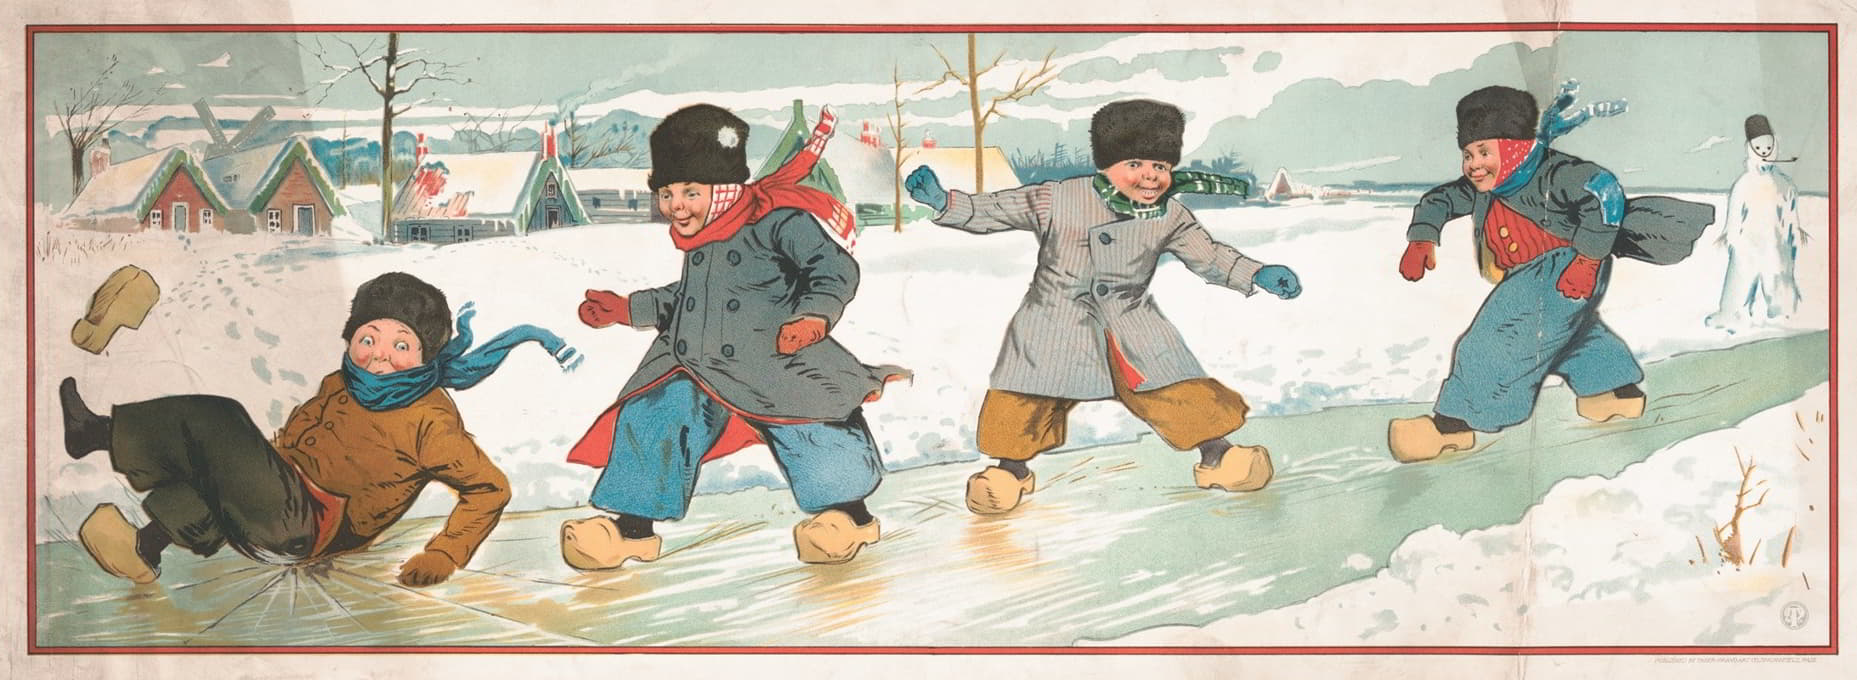 Taber Prang Art Co. - Children playing on the ice during winter